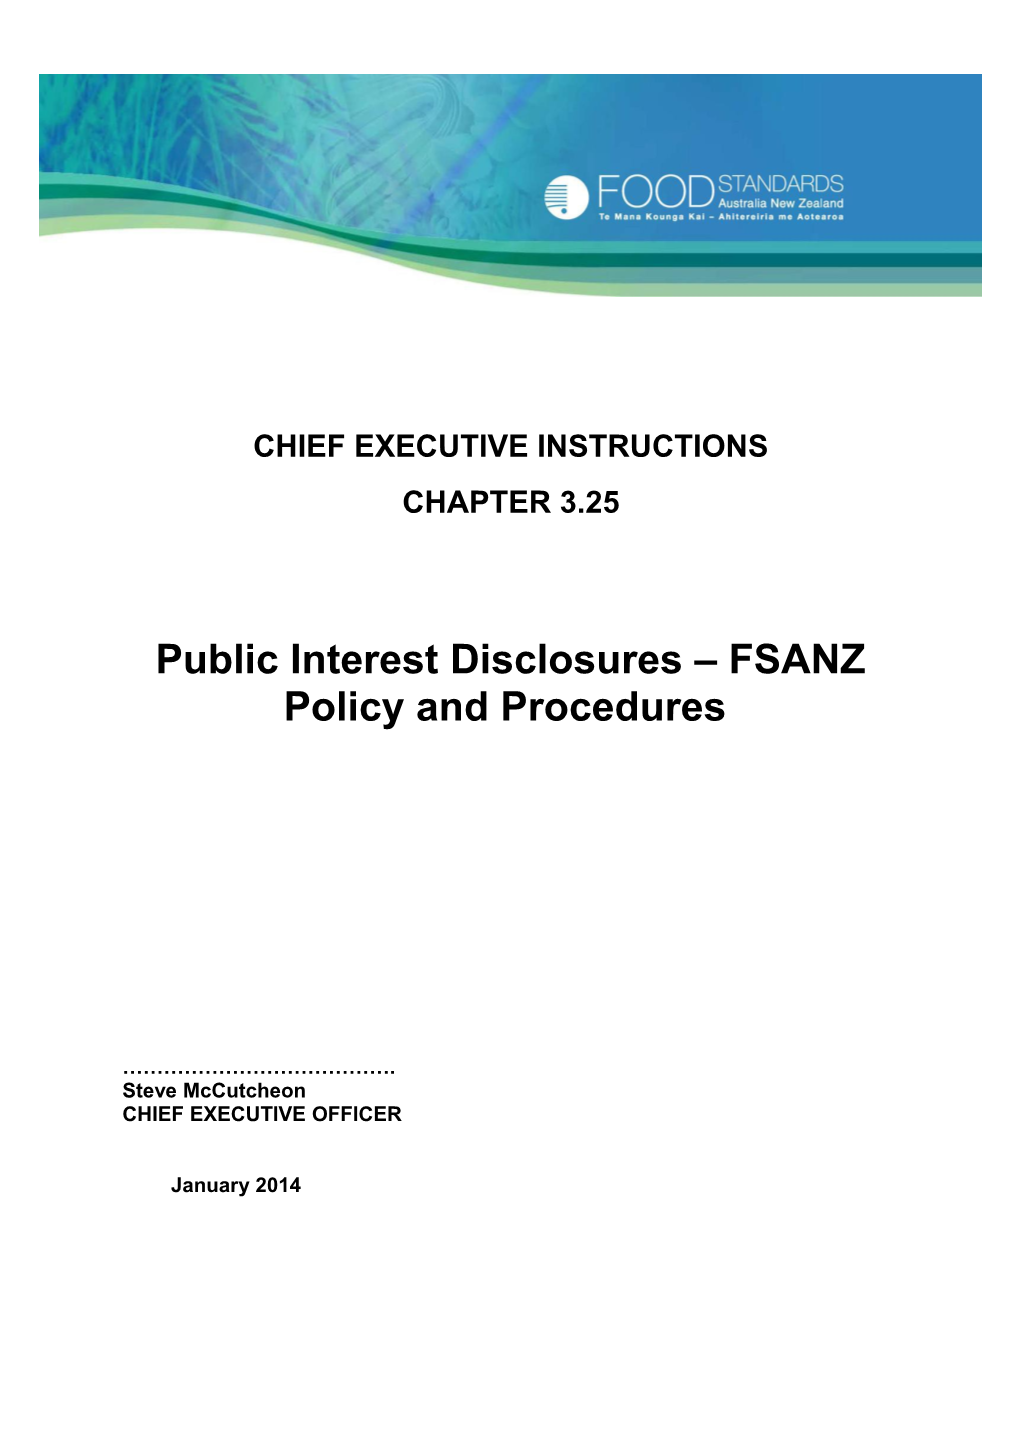 Public Interest Disclosures FSANZ Policy and Procedures